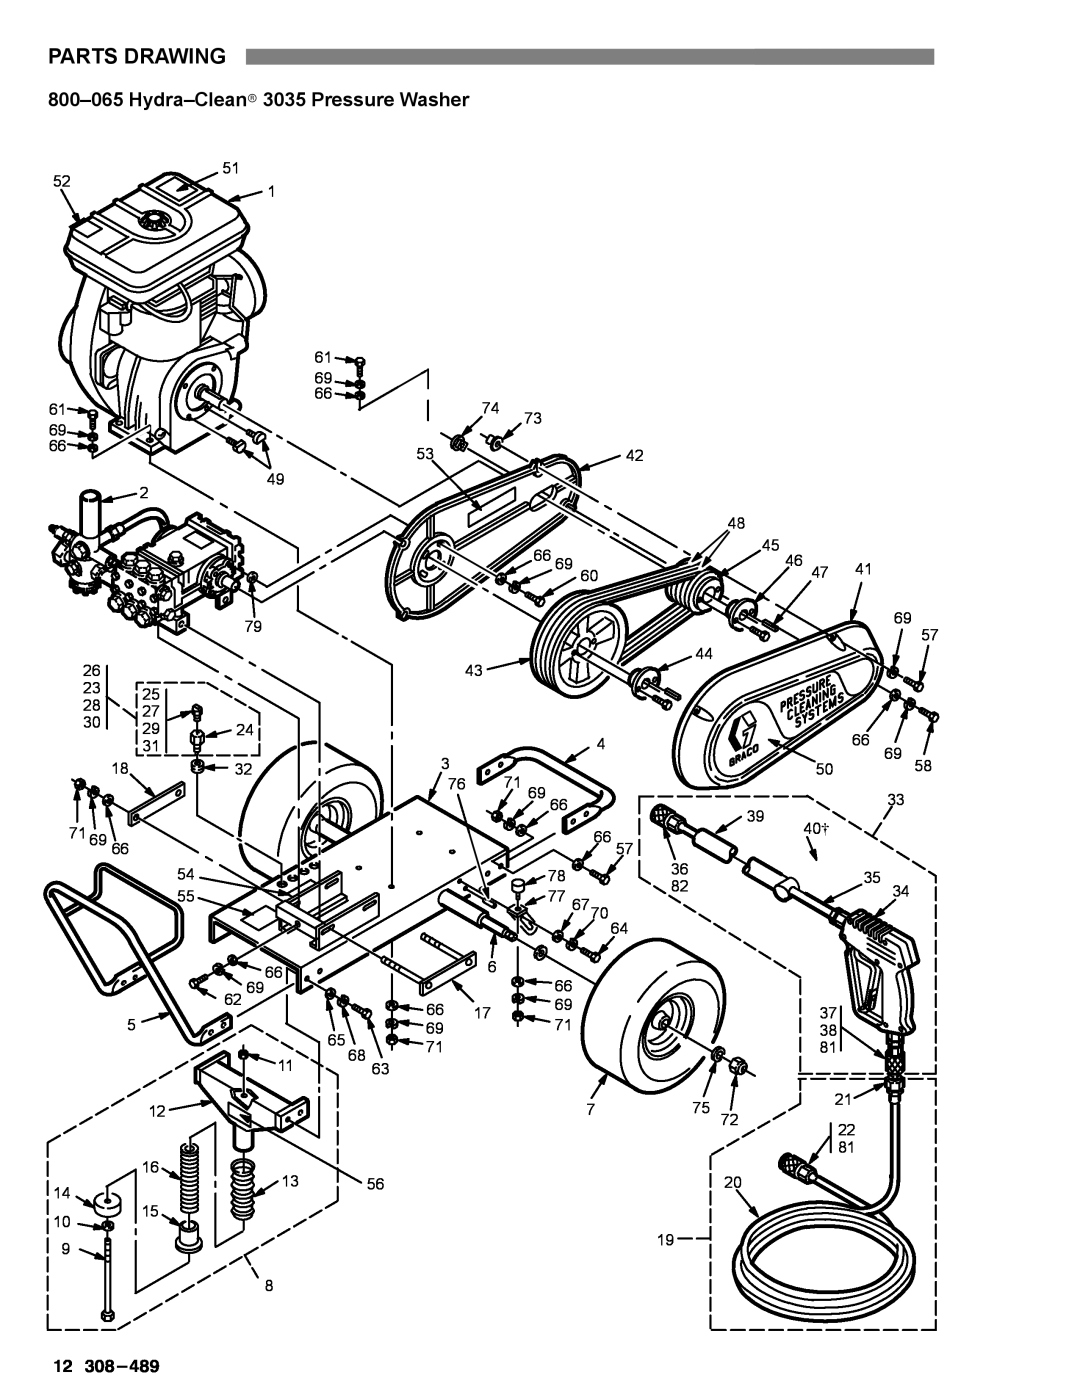 Graco Inc 308-501, 800-063, 800-062, 800-065, 800-335, 2245 manual Hydra-Cleanr 3035 Pressure Washer, Parts Drawing 